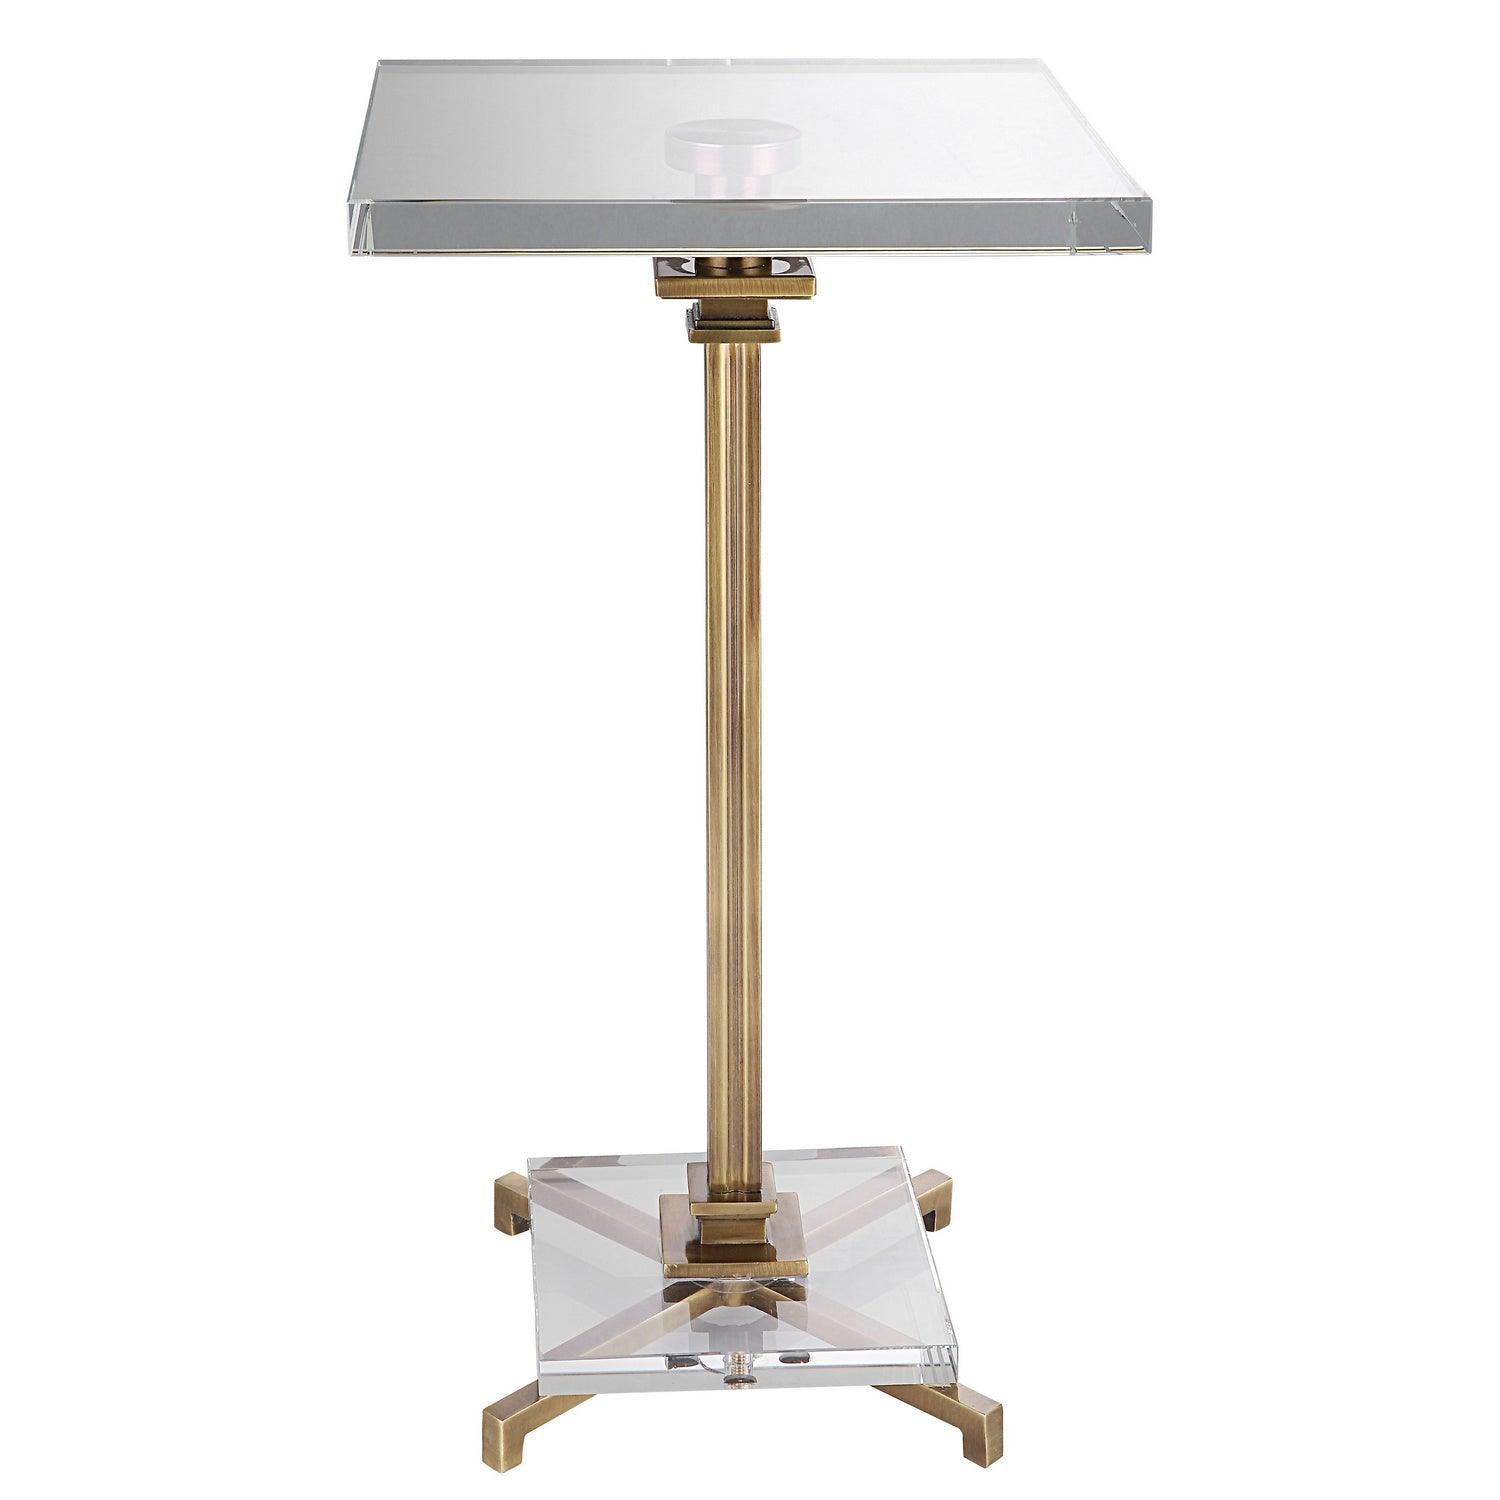 The Uttermost - Richelieu Drink Table - 25142 | Montreal Lighting & Hardware